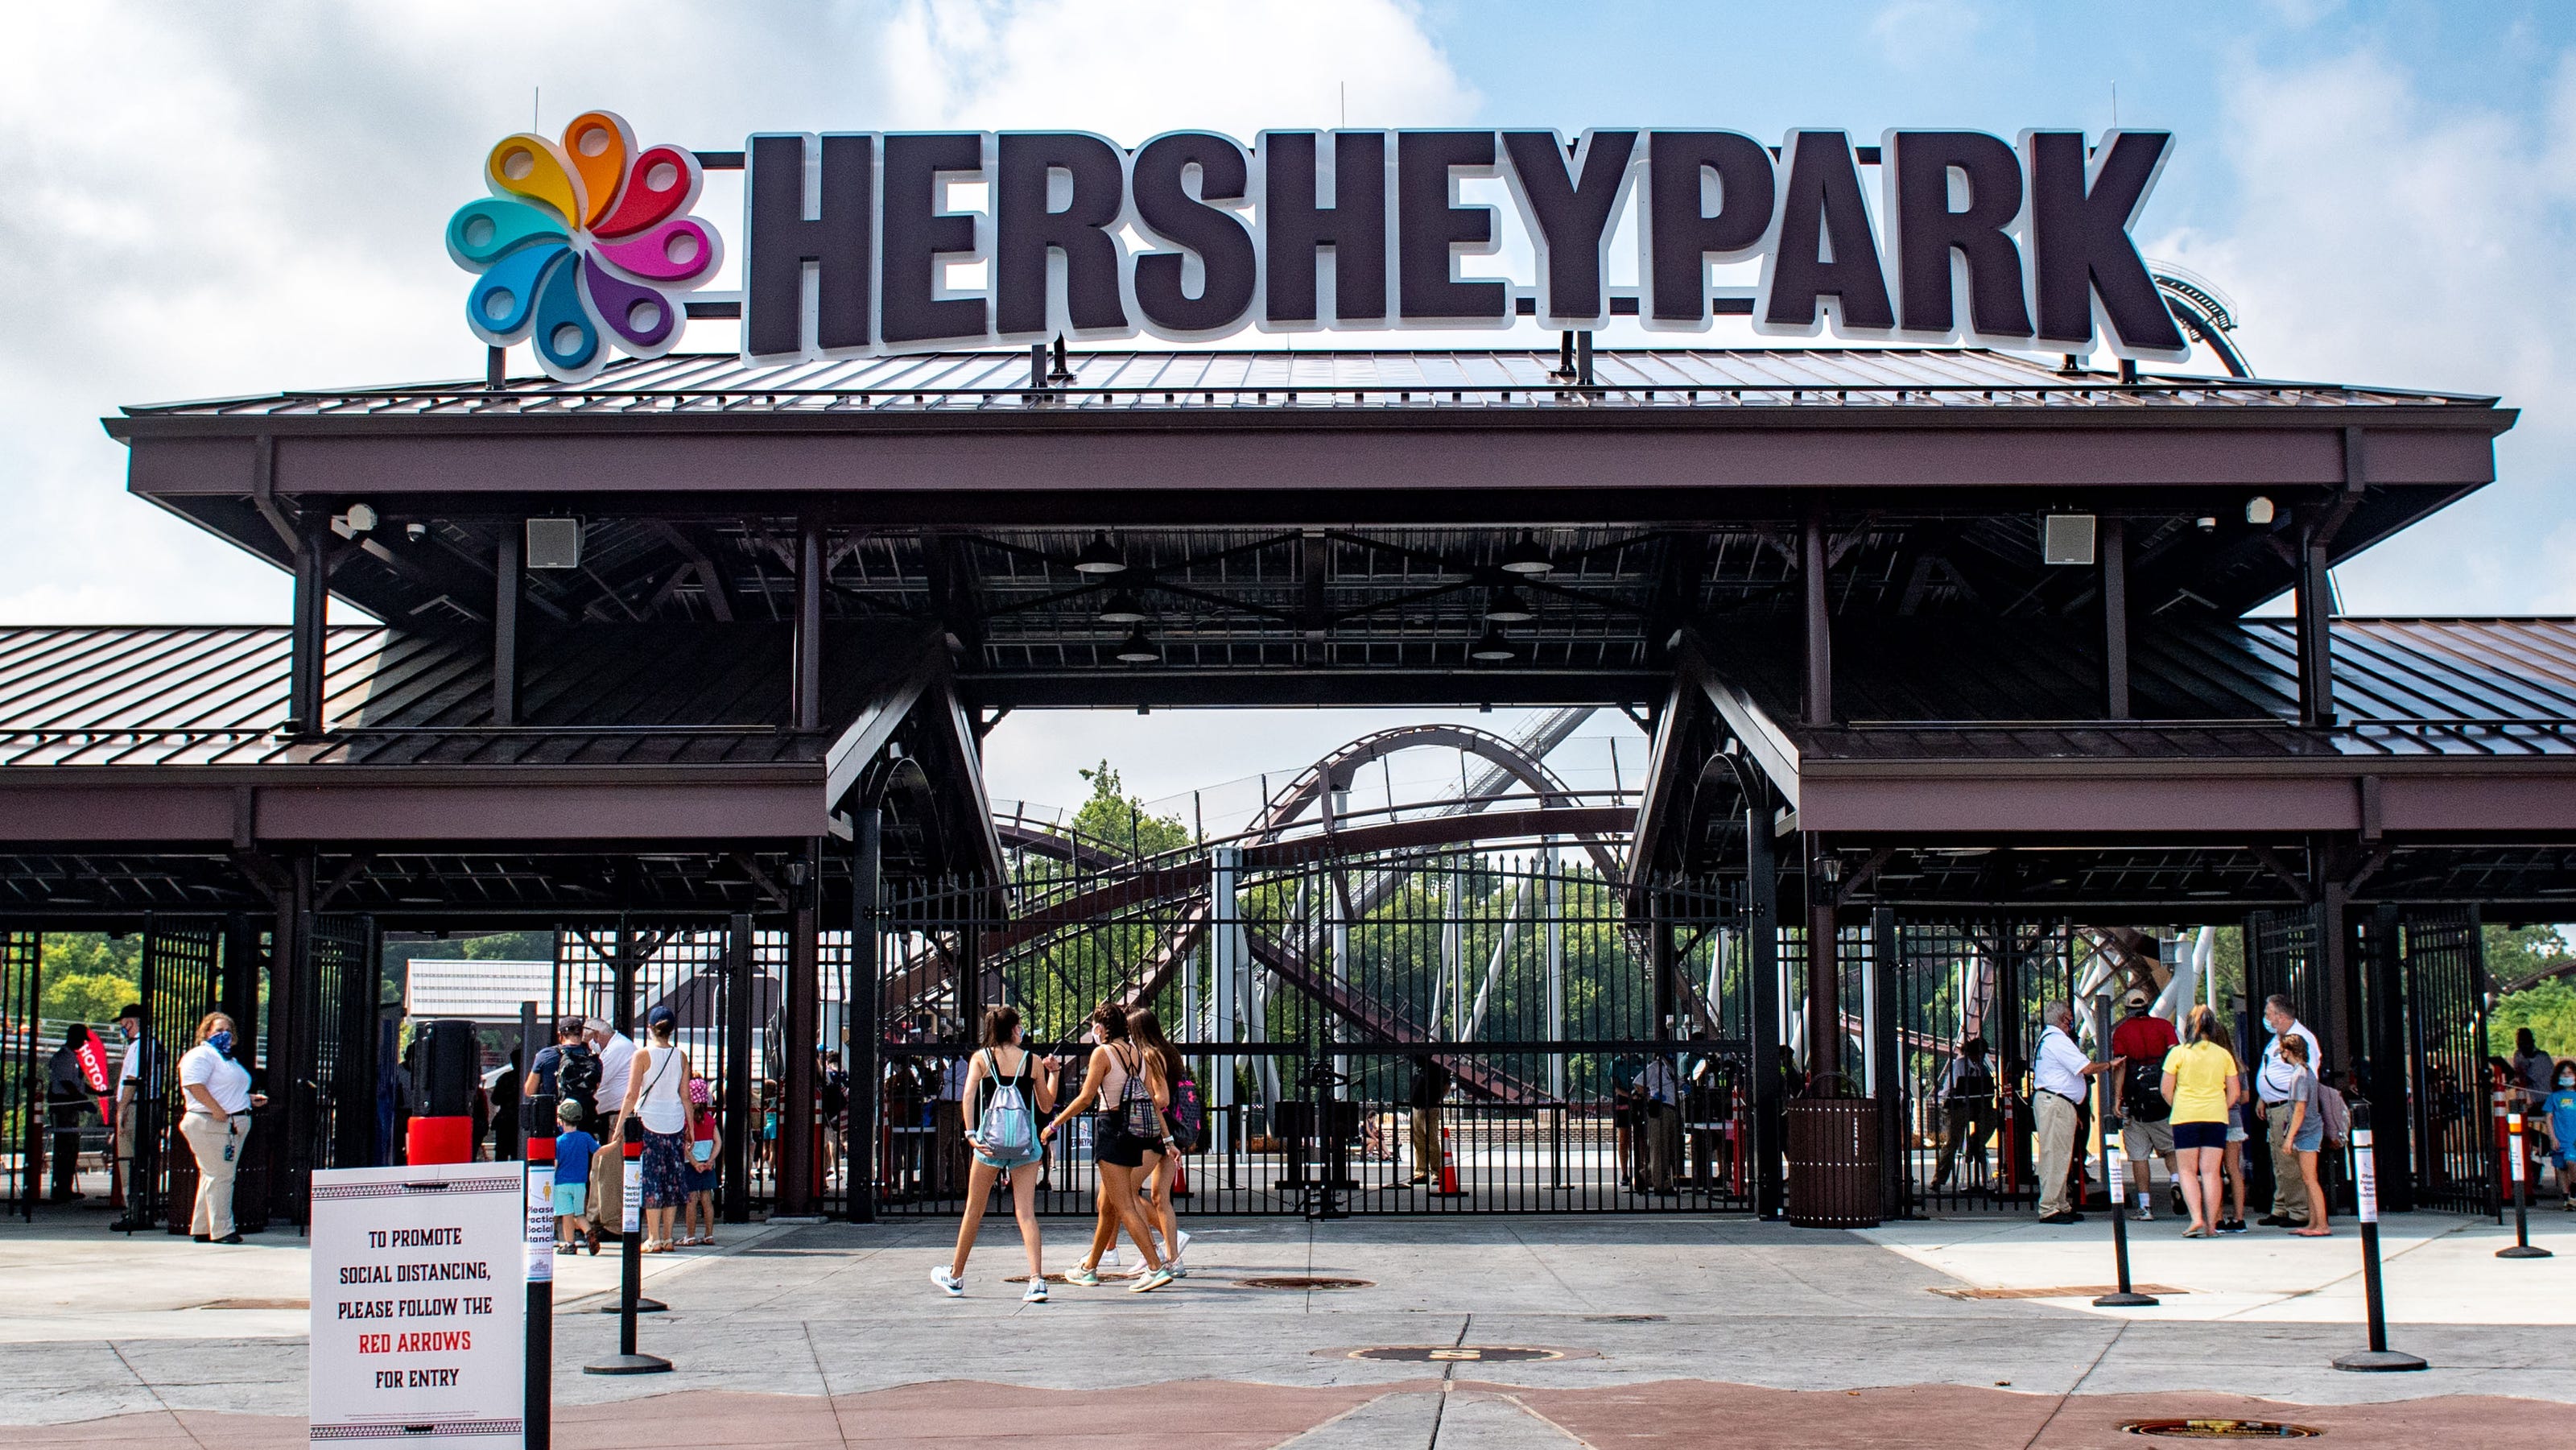 Hersheypark one of first amusement parks in Pennsylvania to open